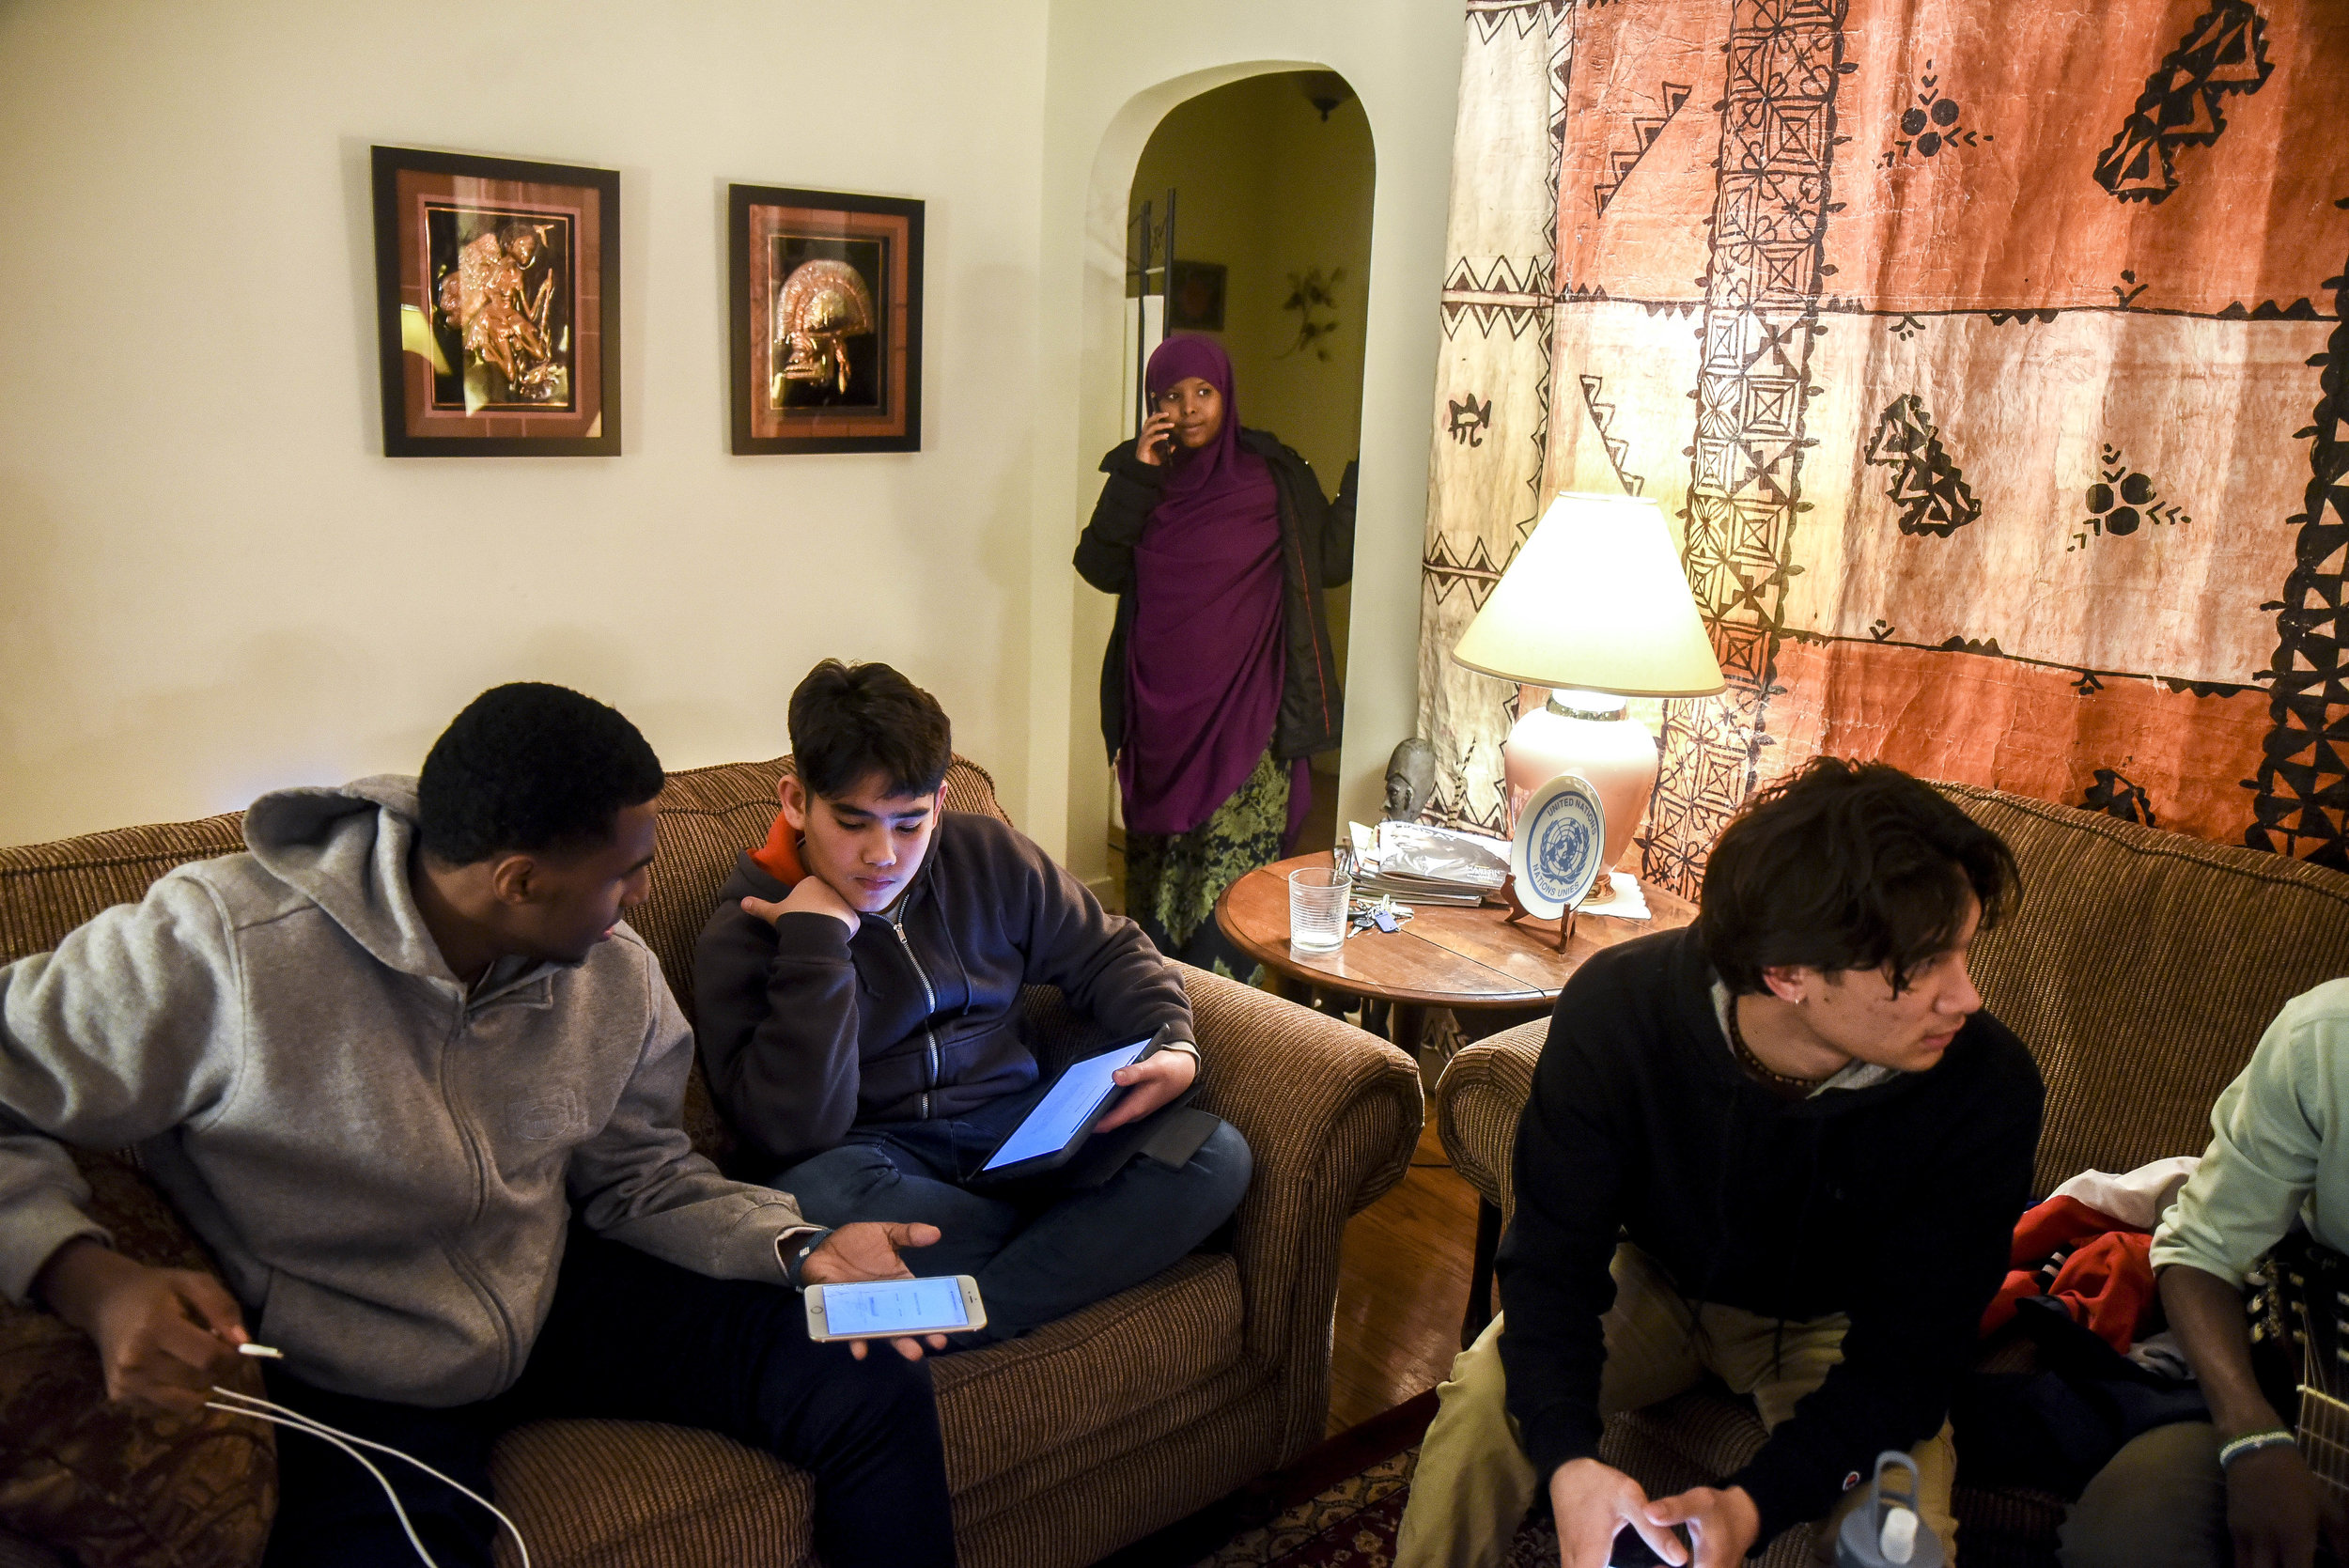  Hamdi Kosar answers a phone call while her friends plays games on their phones Feb. 14, 2019 in Willmar. 